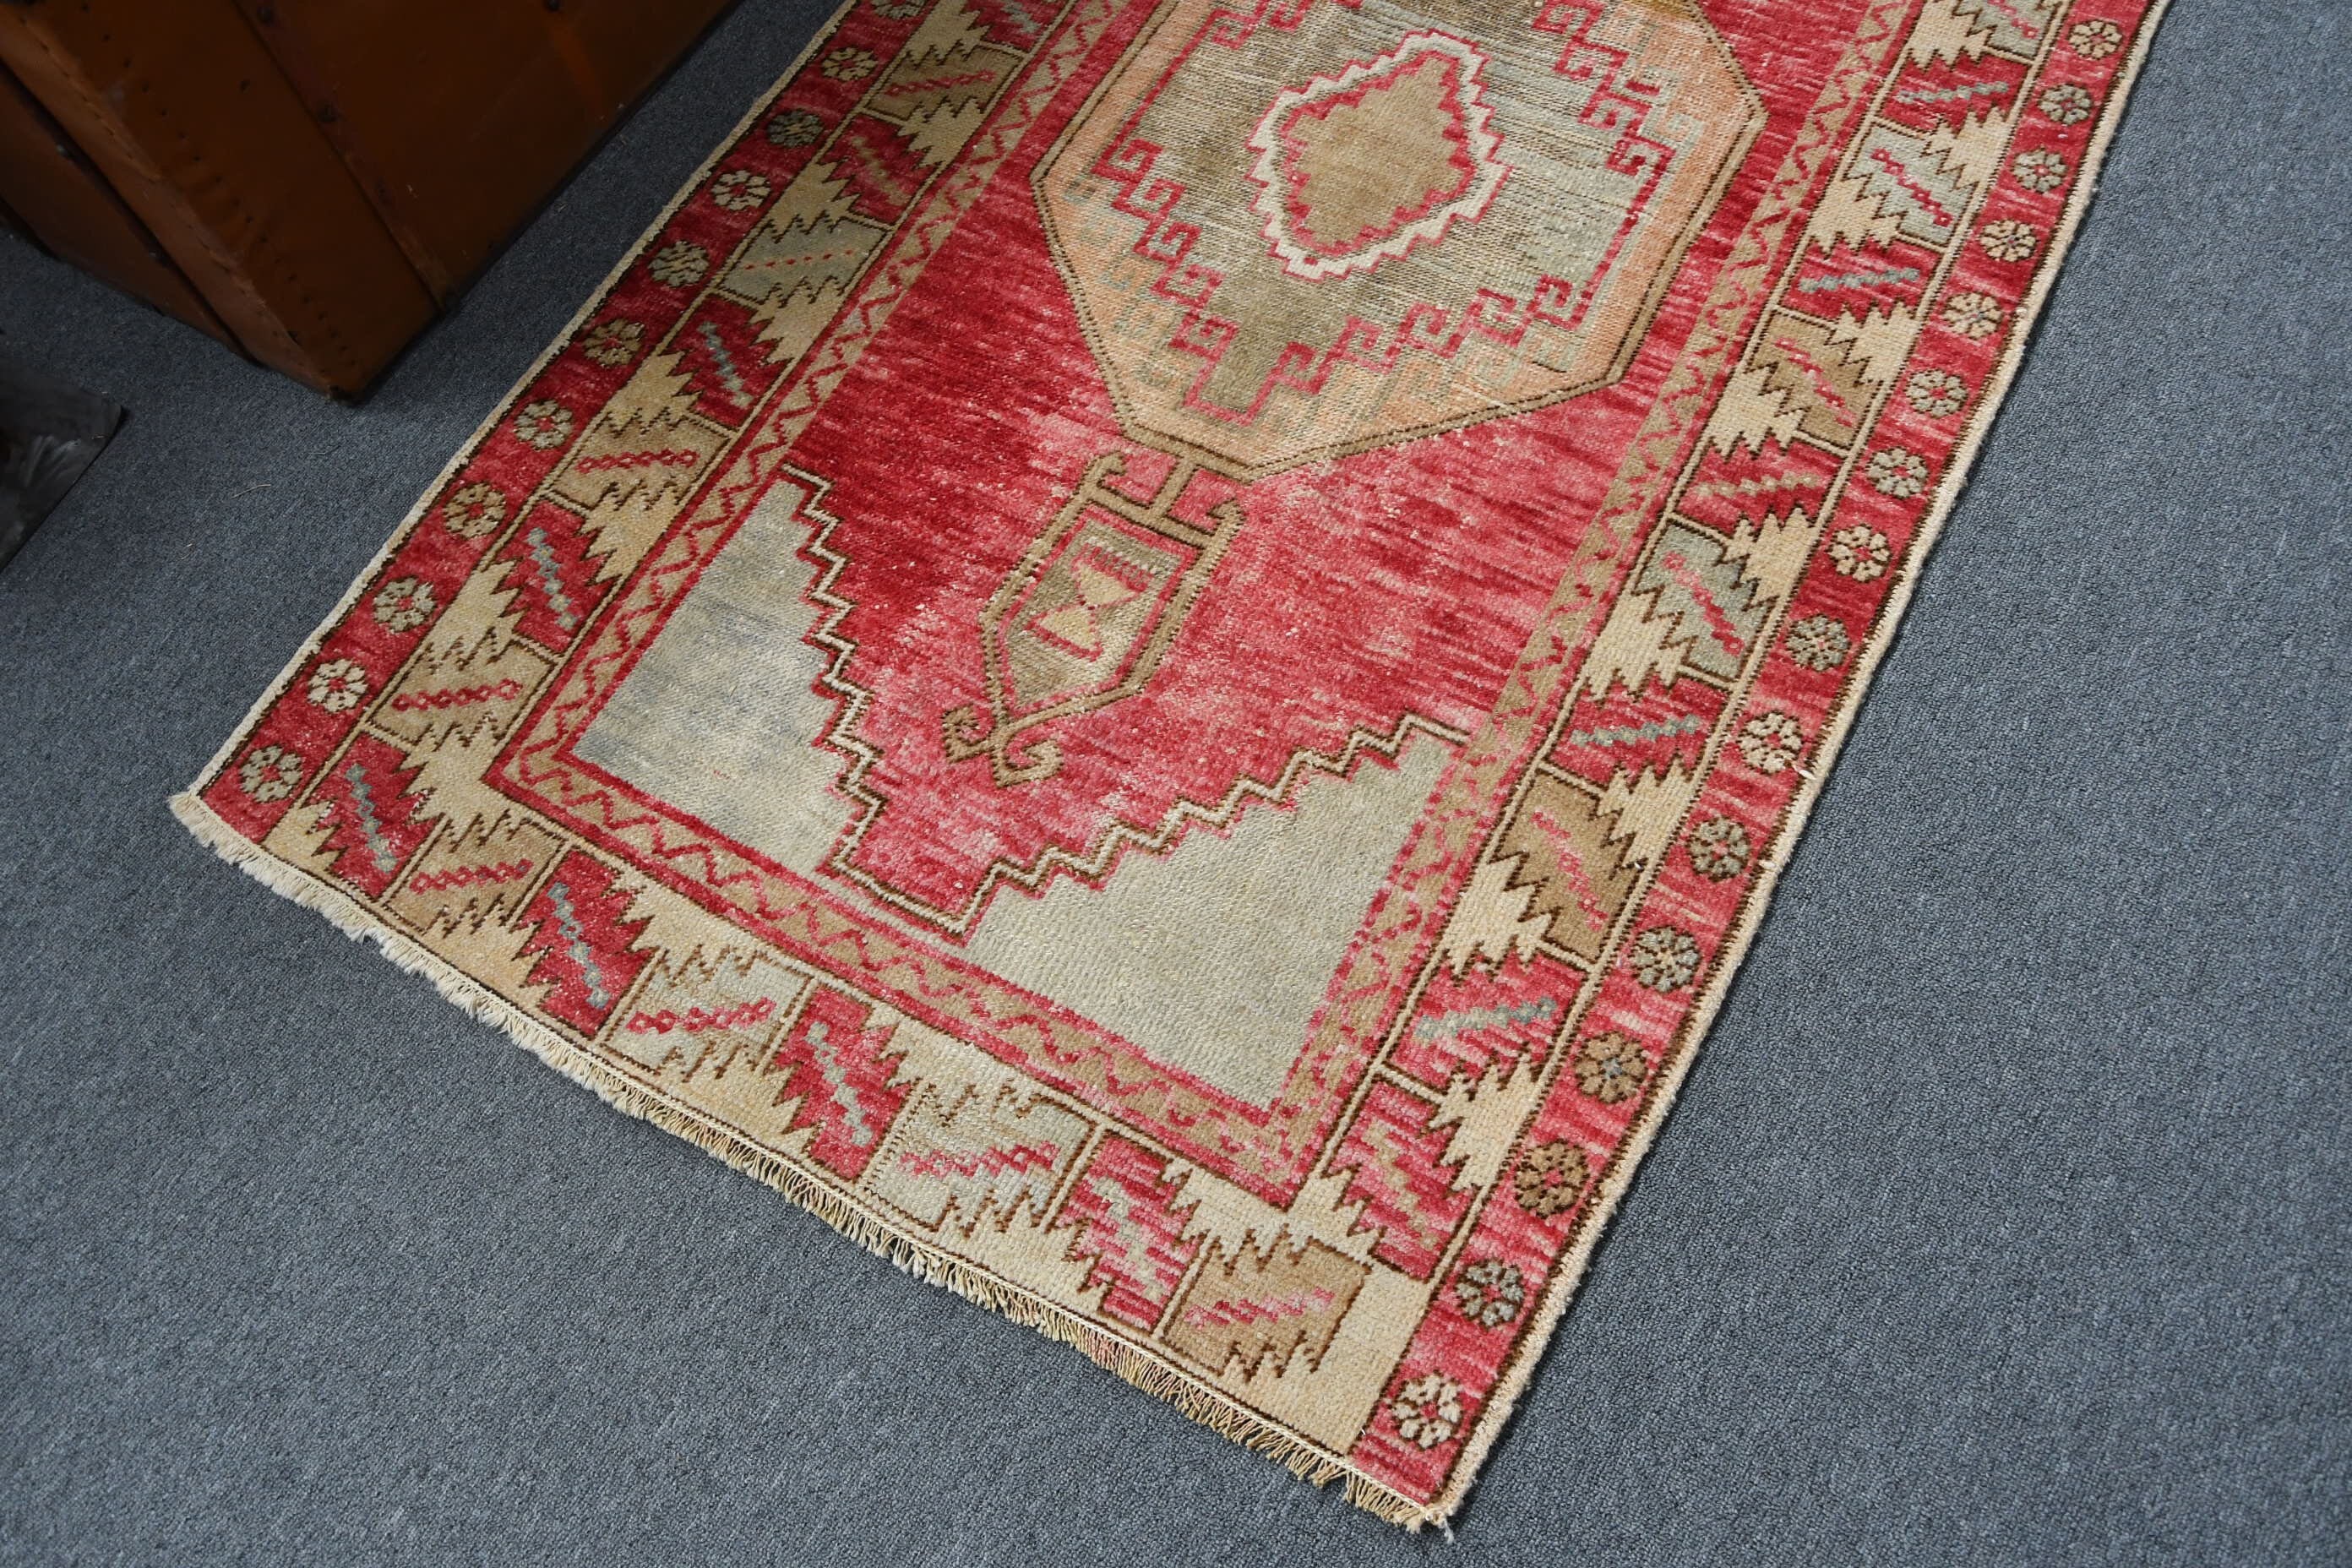 Vintage Rugs, Bedroom Rug, Vintage Decor Rug, Rugs for Entry, Turkish Rug, 3.2x5.2 ft Accent Rug, Moroccan Rug, Cool Rugs, Kitchen Rugs